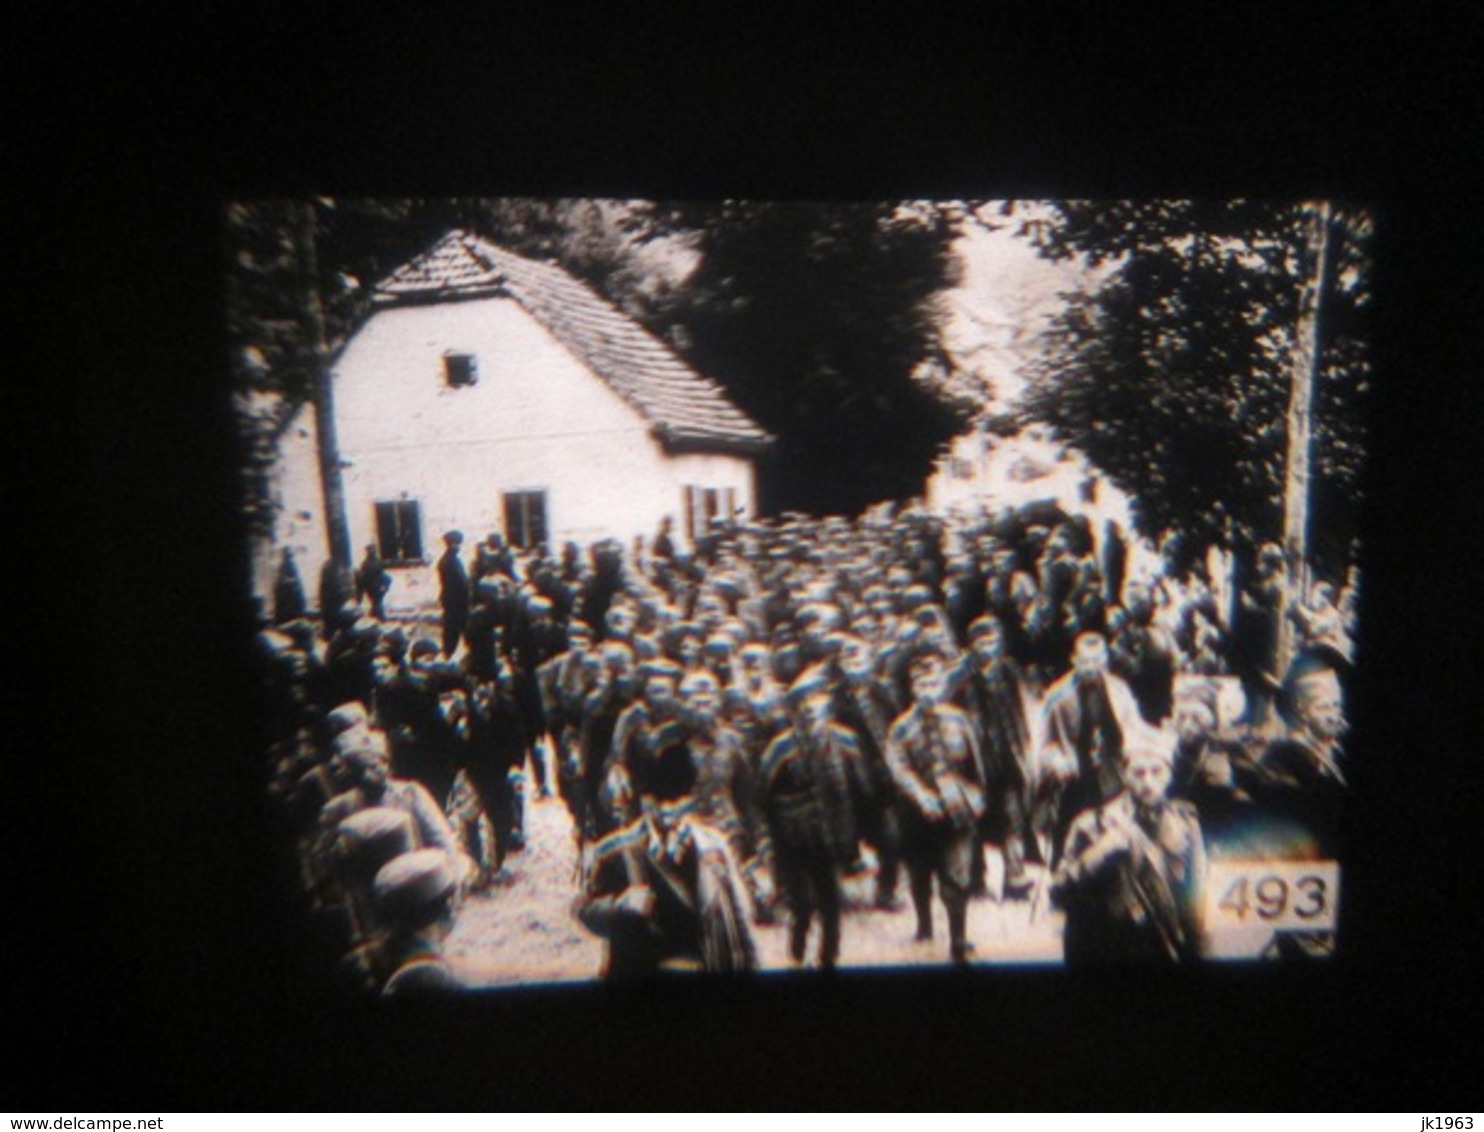 YUGOSLAVIAN PARTISANS 1941-45, 190 VERY RARE SLIDES MADE BY STATE ARCHIVE OF JUGOSLAVIA